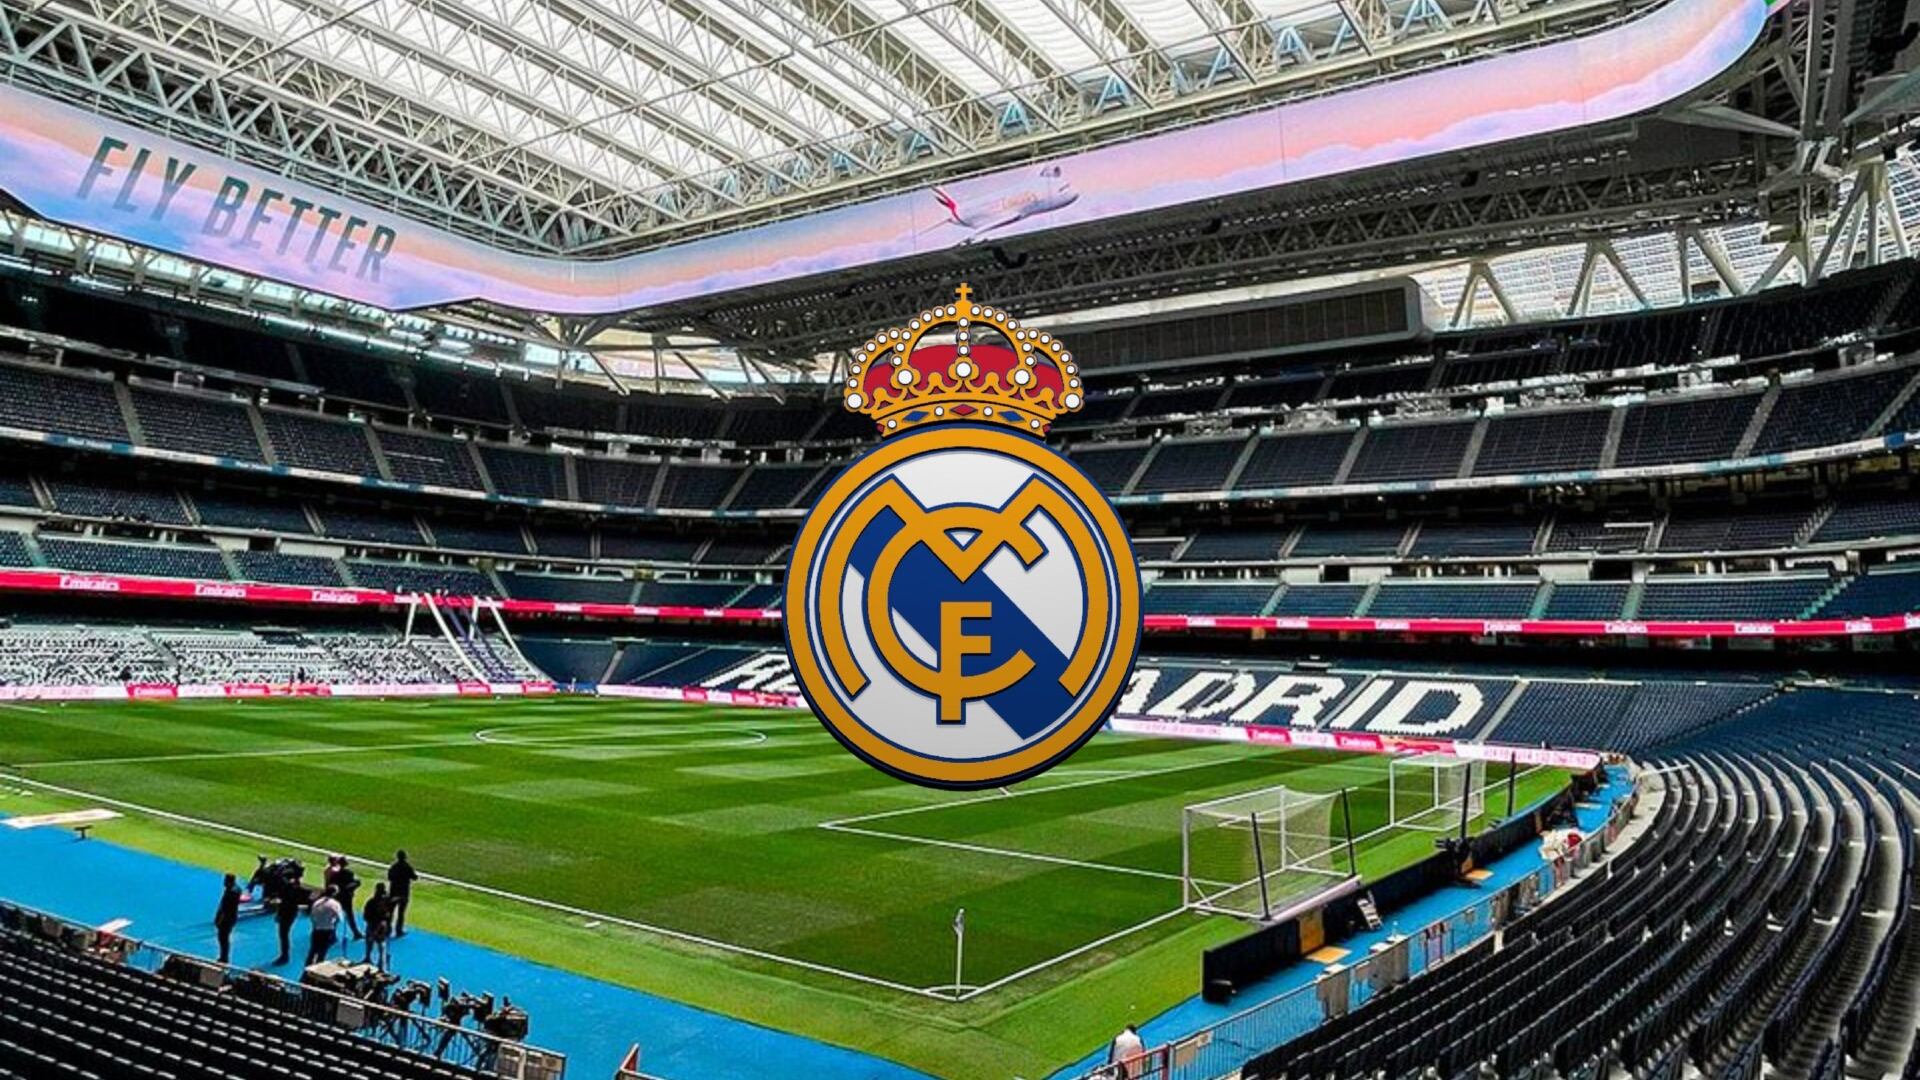 The most luxurious place in the Bernabeu, Real Madrid will open its SkyBar, all details & price to enter for the fans